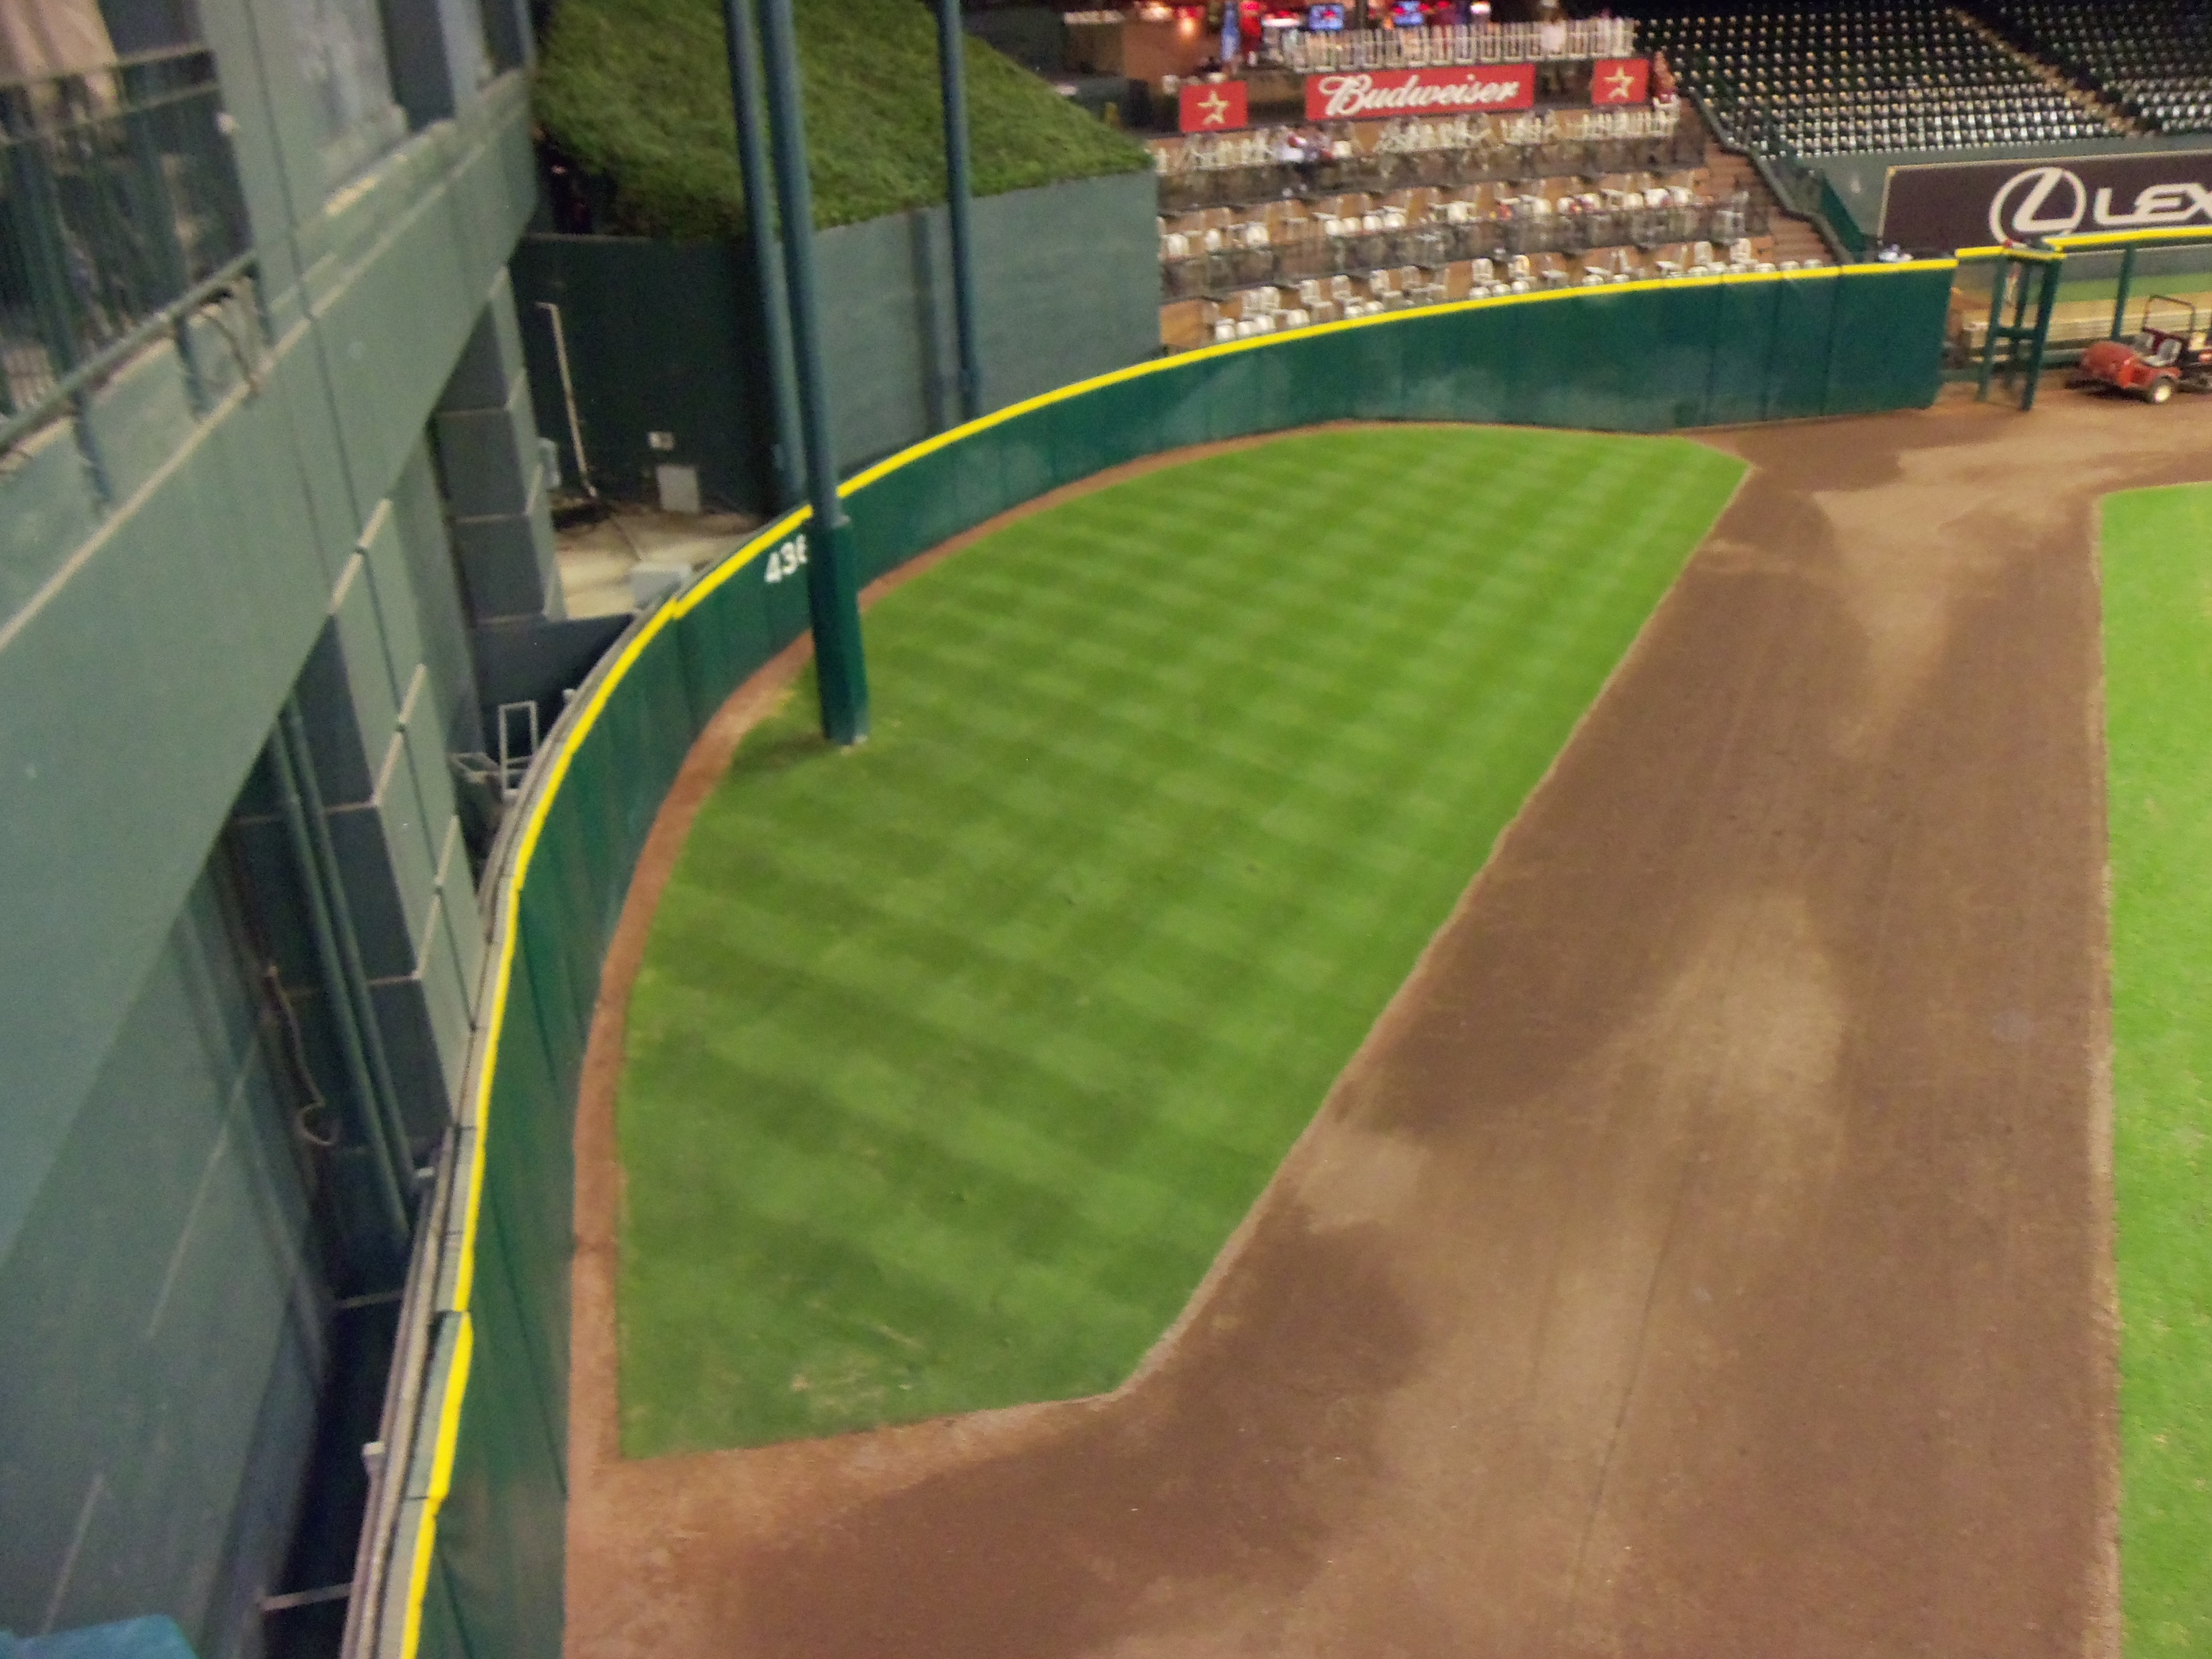 They may get rid of Tal's Hill at Minute Maid Park. Good. - NBC Sports